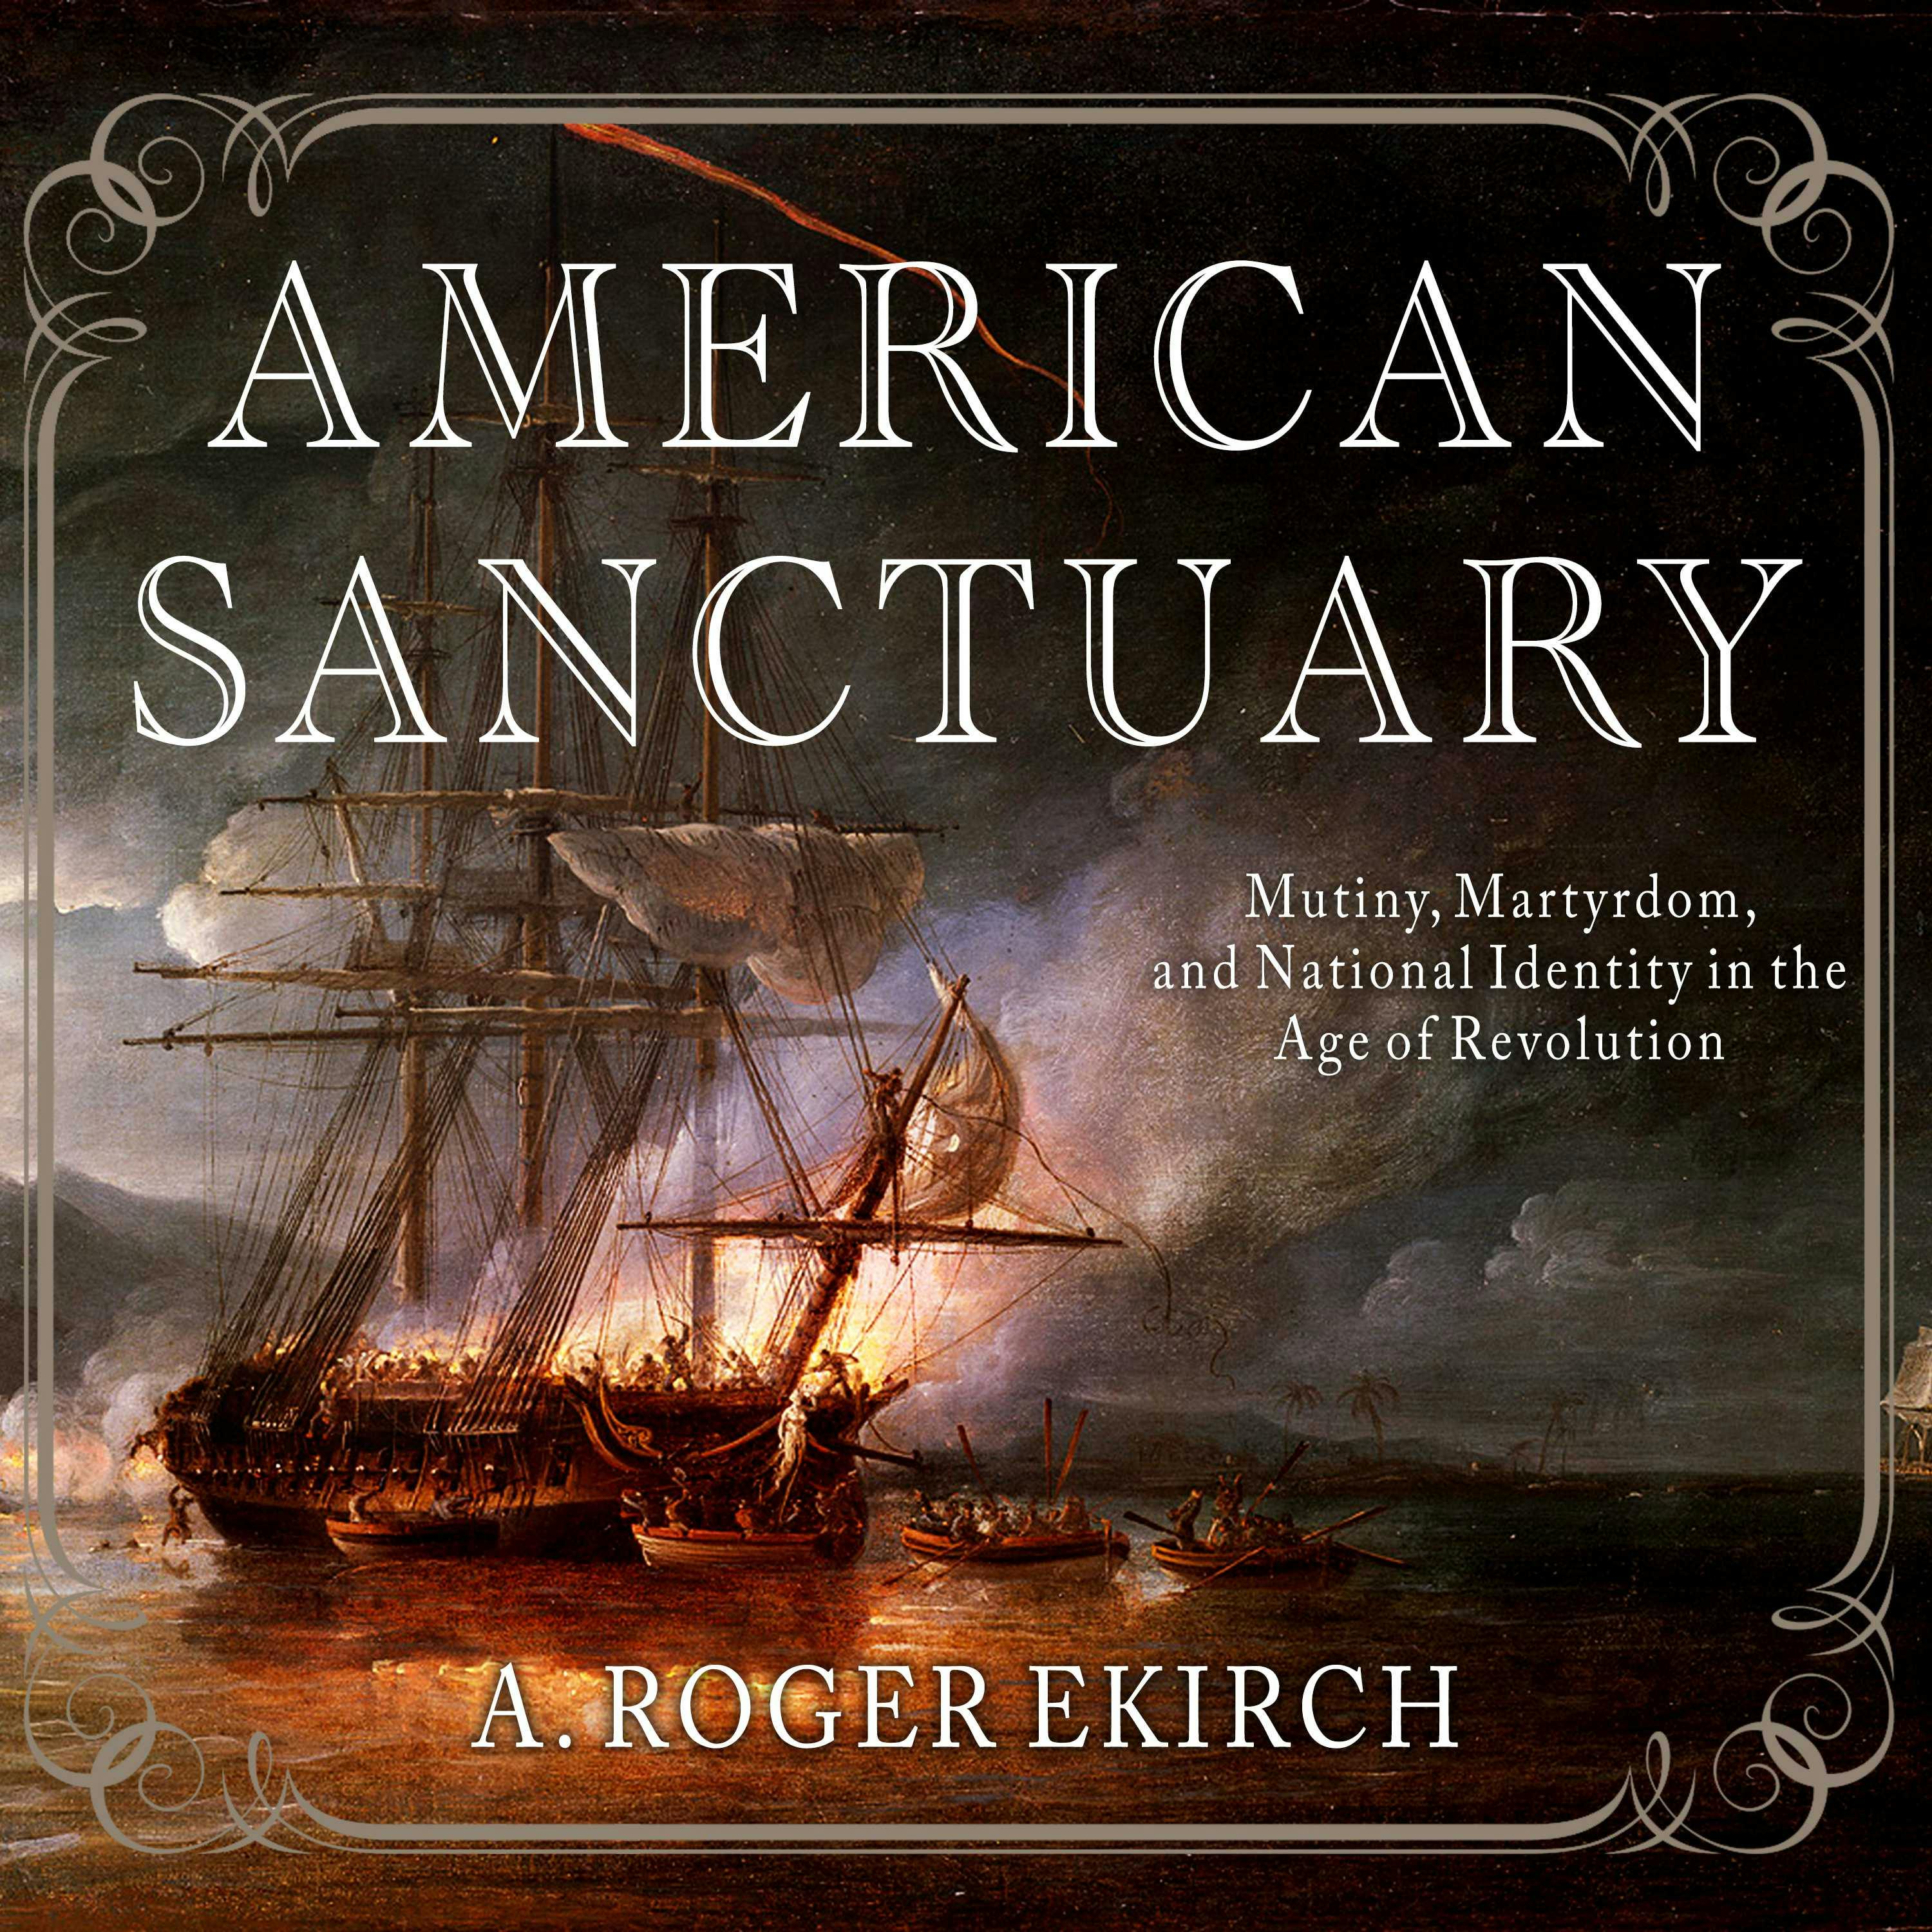 American Sanctuary: Mutiny, Martyrdom, and National Identity in the Age of Revolution - A. Roger Ekirch